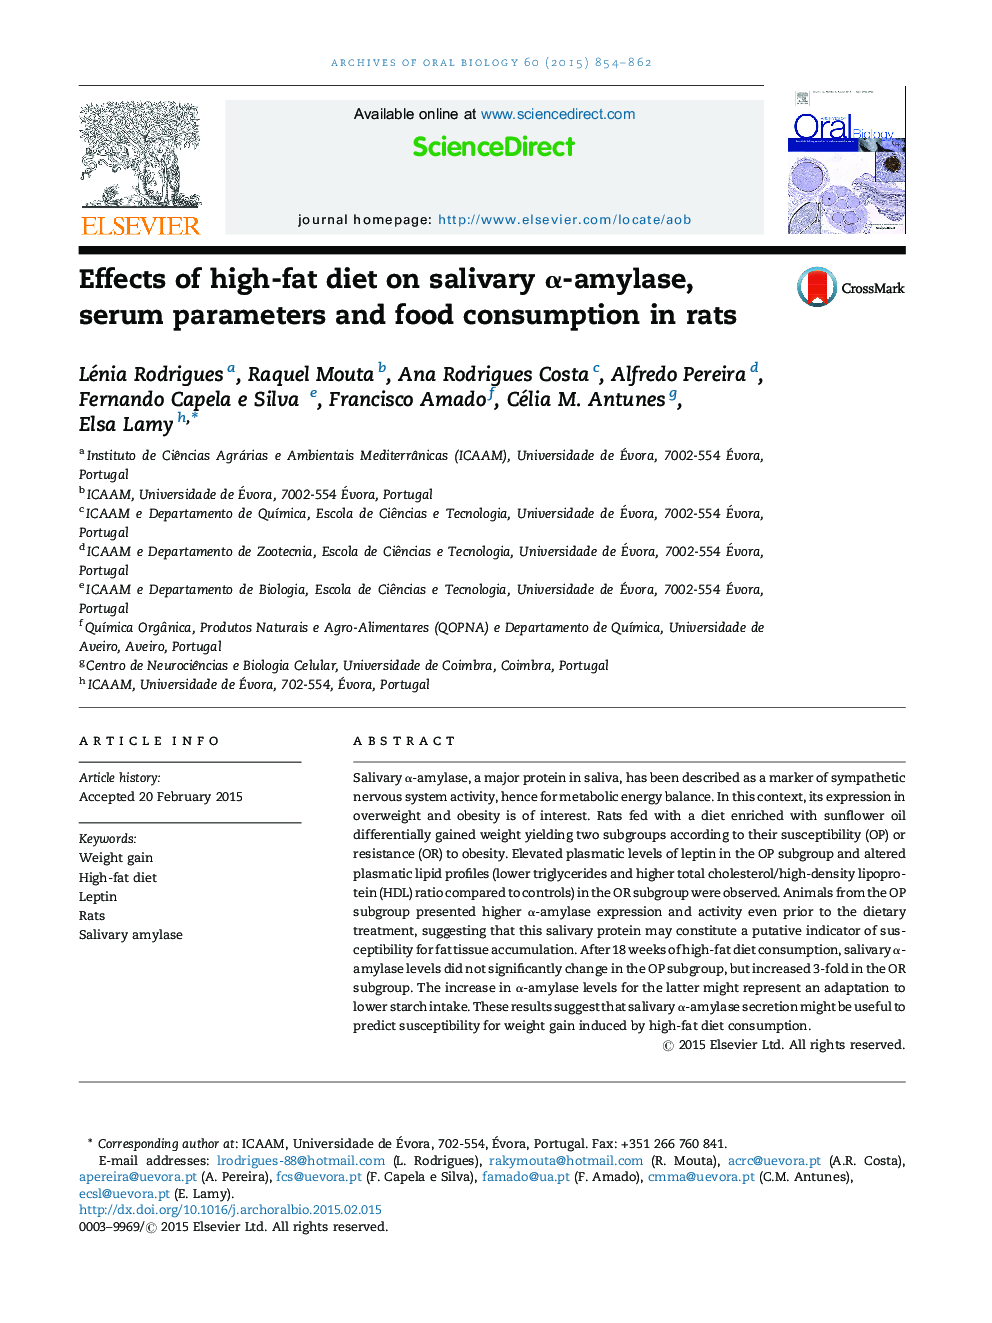 Effects of high-fat diet on salivary Î±-amylase, serum parameters and food consumption in rats